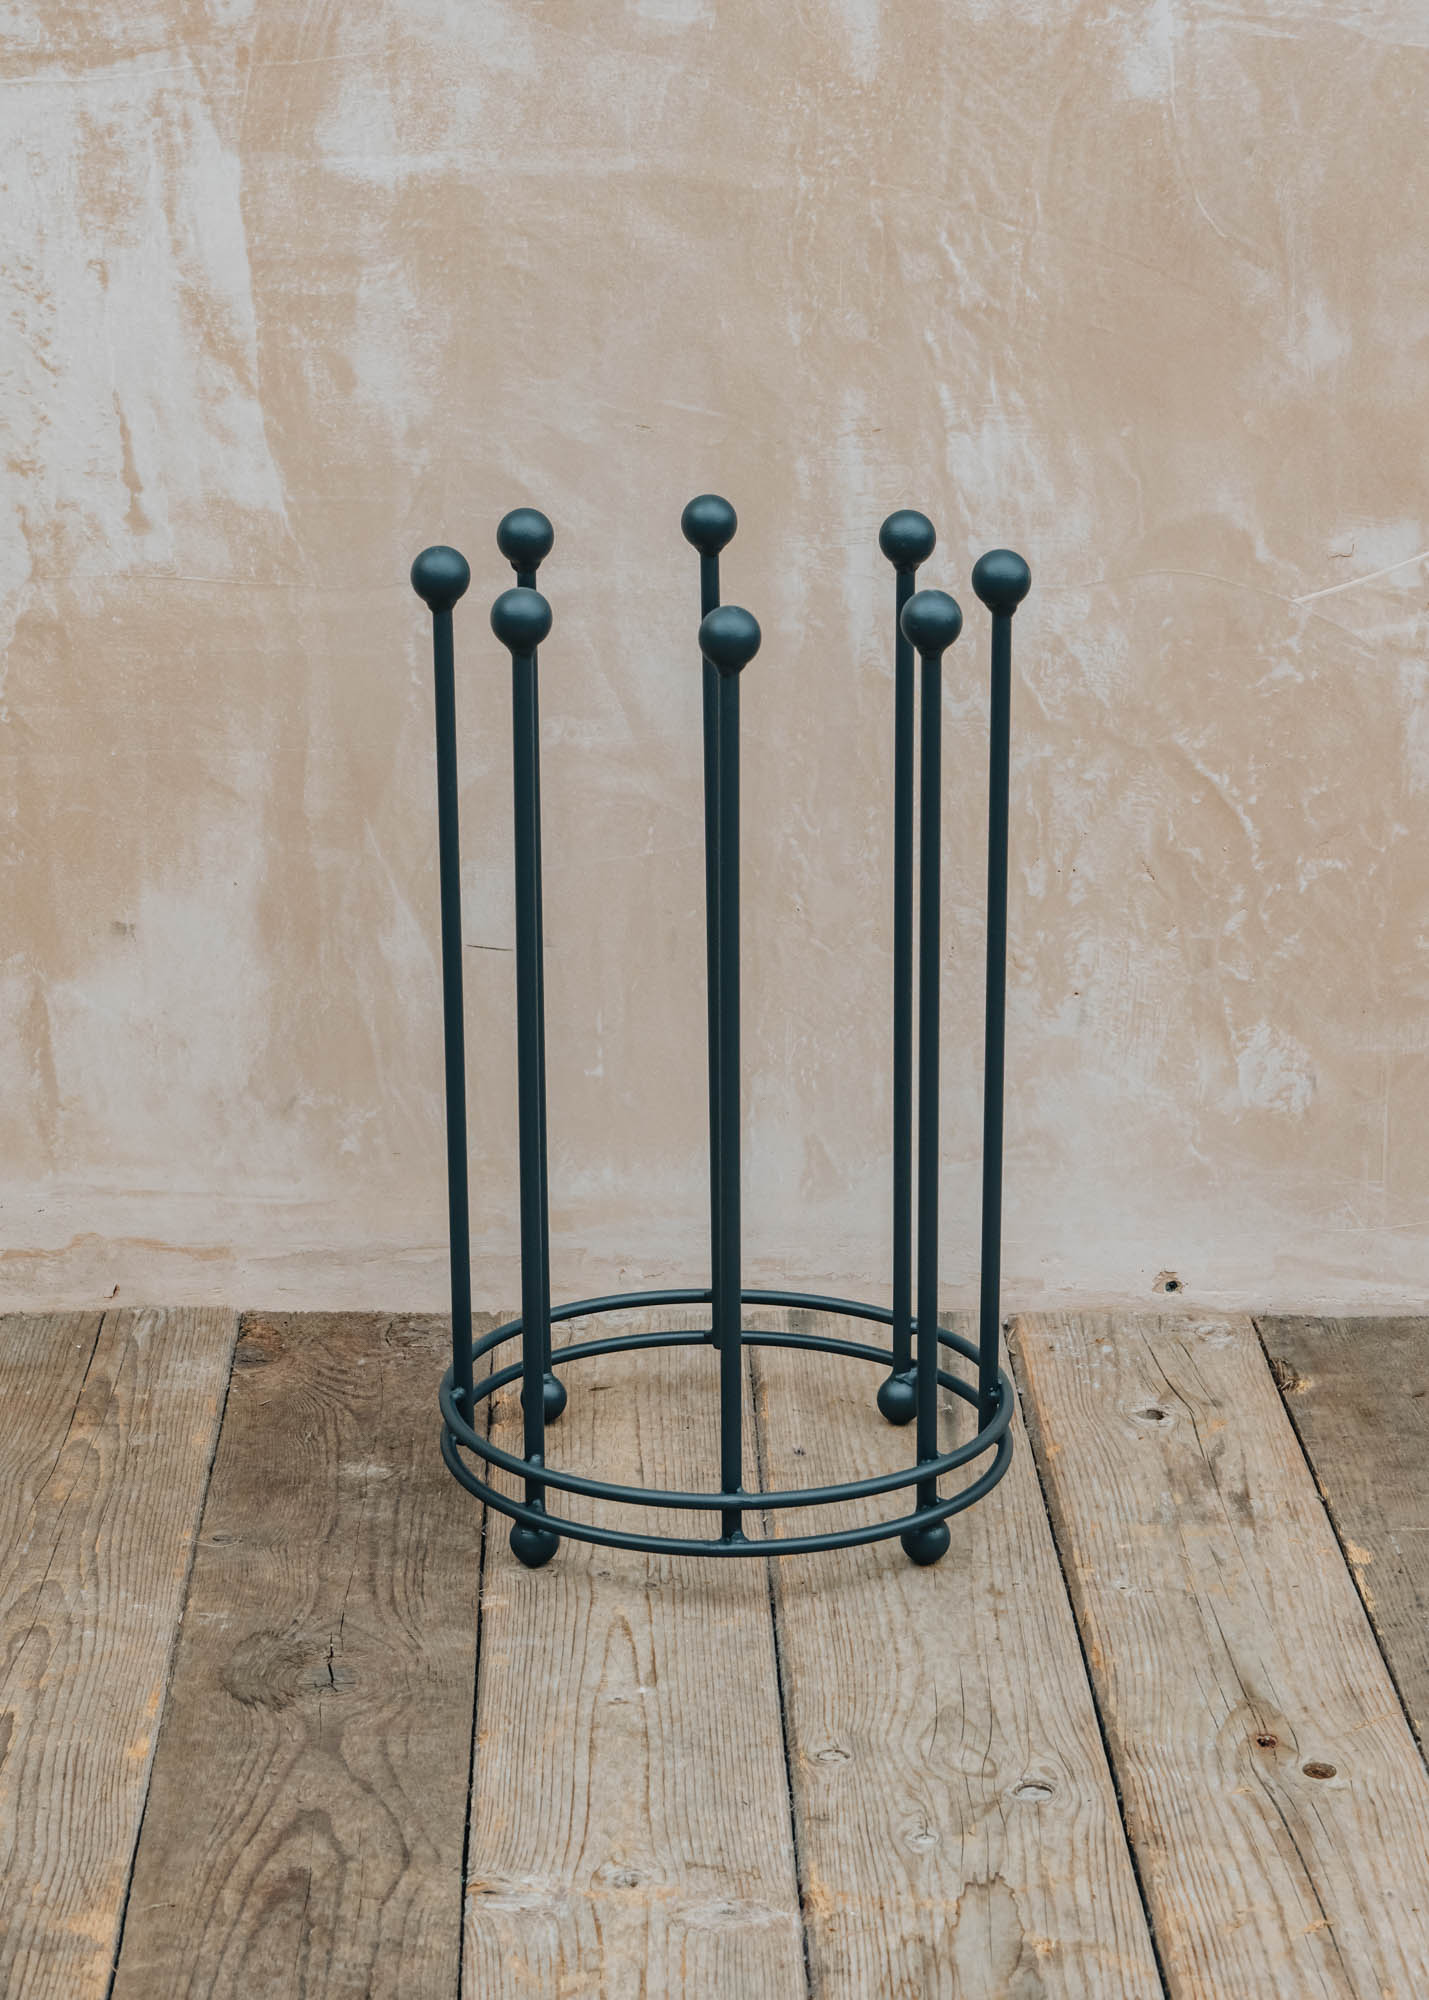 Harrod Horticultural Round Wellington Boot Stand in Anthracite